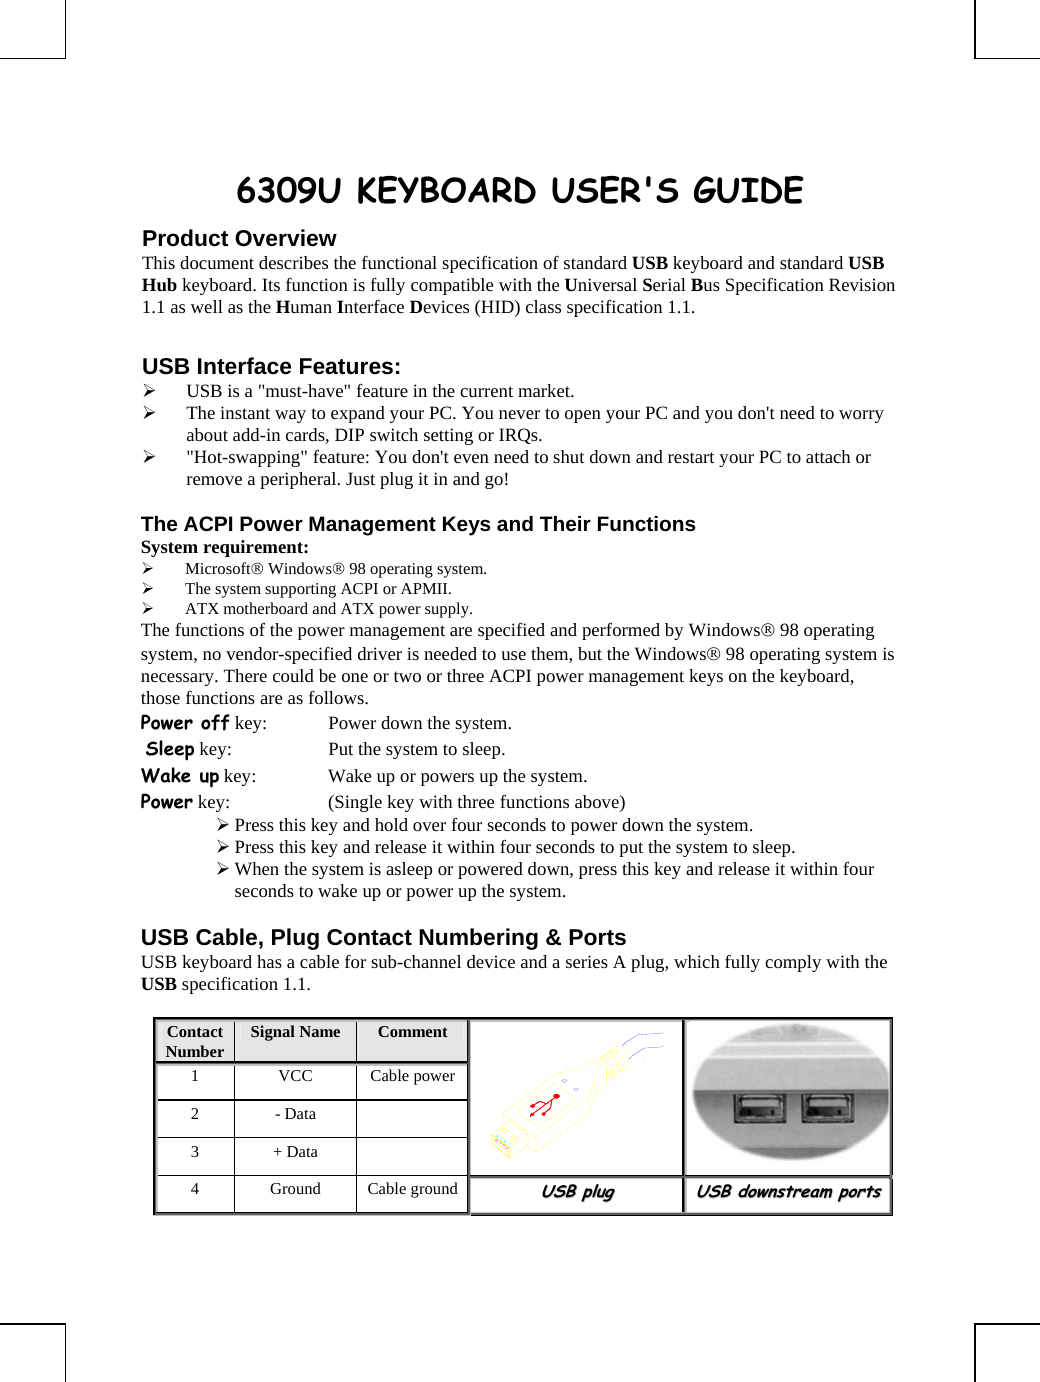       6309U KEYBOARD USER&apos;S GUIDE Product Overview This document describes the functional specification of standard USB keyboard and standard USB Hub keyboard. Its function is fully compatible with the Universal Serial Bus Specification Revision 1.1 as well as the Human Interface Devices (HID) class specification 1.1.  USB Interface Features: ¾ USB is a &quot;must-have&quot; feature in the current market. ¾ The instant way to expand your PC. You never to open your PC and you don&apos;t need to worry about add-in cards, DIP switch setting or IRQs. ¾ &quot;Hot-swapping&quot; feature: You don&apos;t even need to shut down and restart your PC to attach or remove a peripheral. Just plug it in and go!  The ACPI Power Management Keys and Their Functions System requirement:  ¾ Microsoft® Windows® 98 operating system. ¾ The system supporting ACPI or APMII. ¾ ATX motherboard and ATX power supply. The functions of the power management are specified and performed by Windows® 98 operating system, no vendor-specified driver is needed to use them, but the Windows® 98 operating system is necessary. There could be one or two or three ACPI power management keys on the keyboard, those functions are as follows. Power off key:  Power down the system.  Sleep key:  Put the system to sleep.  Wake up key:  Wake up or powers up the system.  Power key:  (Single key with three functions above)      ¾ Press this key and hold over four seconds to power down the system. ¾ Press this key and release it within four seconds to put the system to sleep. ¾ When the system is asleep or powered down, press this key and release it within four seconds to wake up or power up the system.  USB Cable, Plug Contact Numbering &amp; Ports USB keyboard has a cable for sub-channel device and a series A plug, which fully comply with the USB specification 1.1.  Contact Number  Signal Name   Comment 1 VCC Cable power2 - Data   3 + Data    4 Ground Cable groundUUSSBB  pplluugg  UUSSBB  ddoowwnnssttrreeaamm  ppoorrttss  